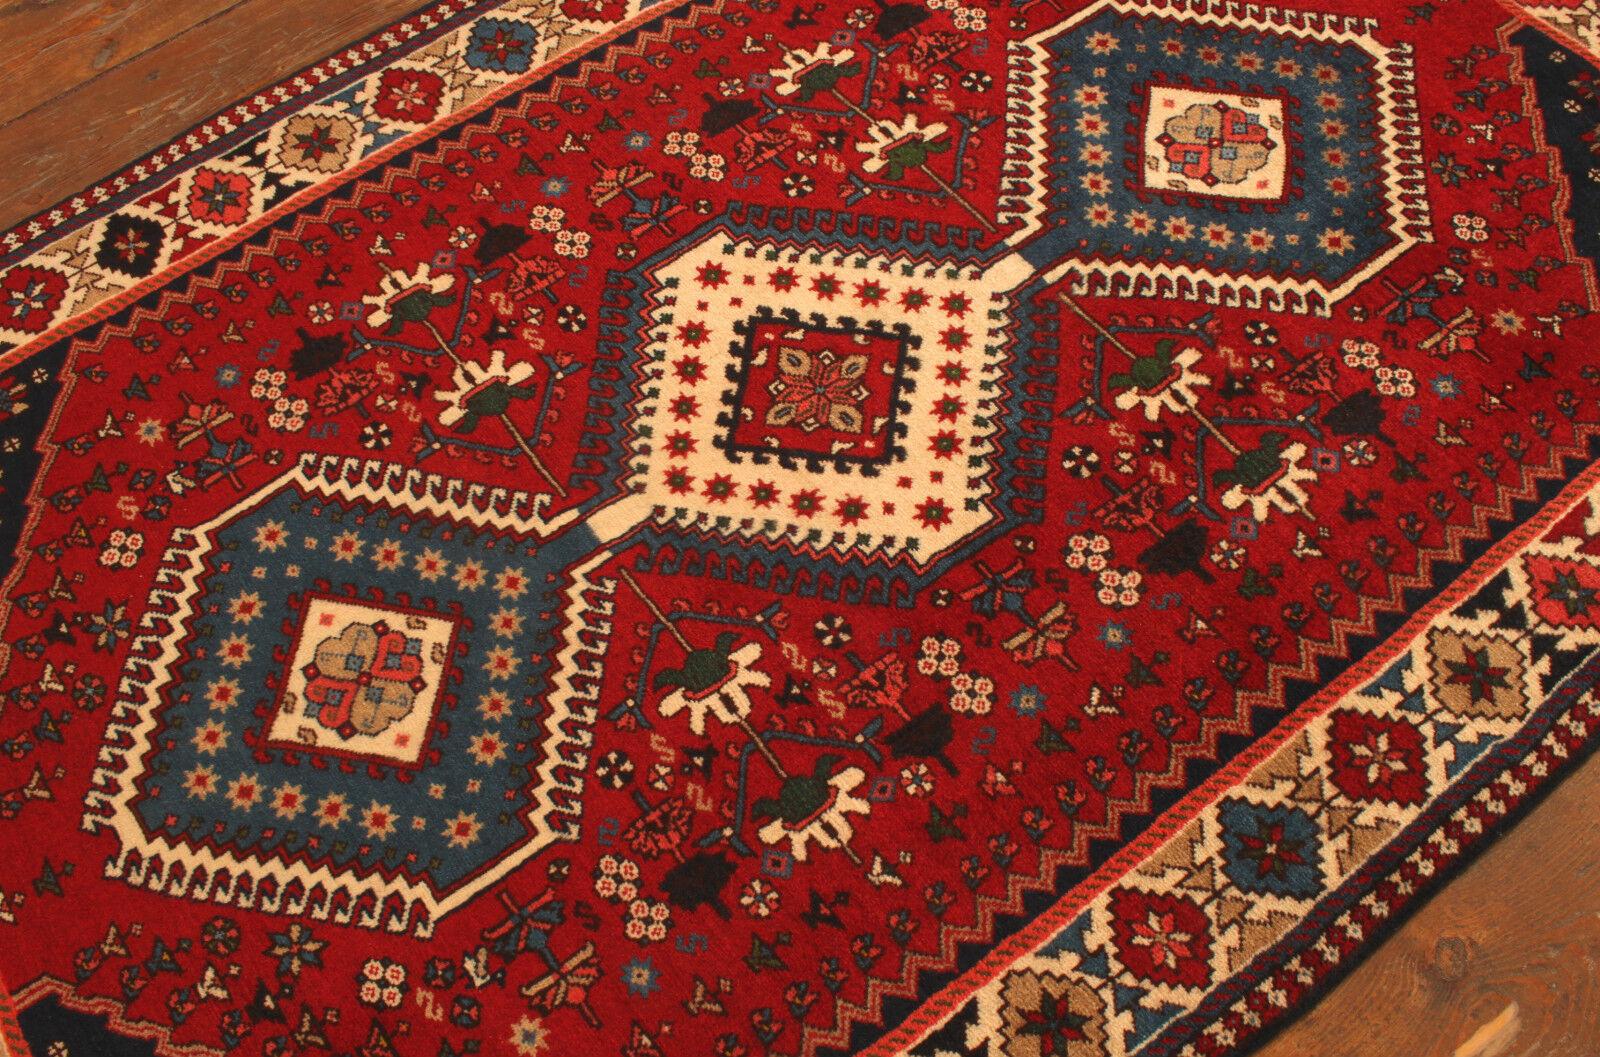 Handmade Vintage Persian Style Yalameh Rug

Dimensions: 3.4’ x 5.2’ (approximately 106 cm x 160 cm)
Material: 100% Wool
Era: 1990s
Condition: Excellent, as new

Discover the allure of this handcrafted Yalameh rug, a vintage treasure from the 1990s.